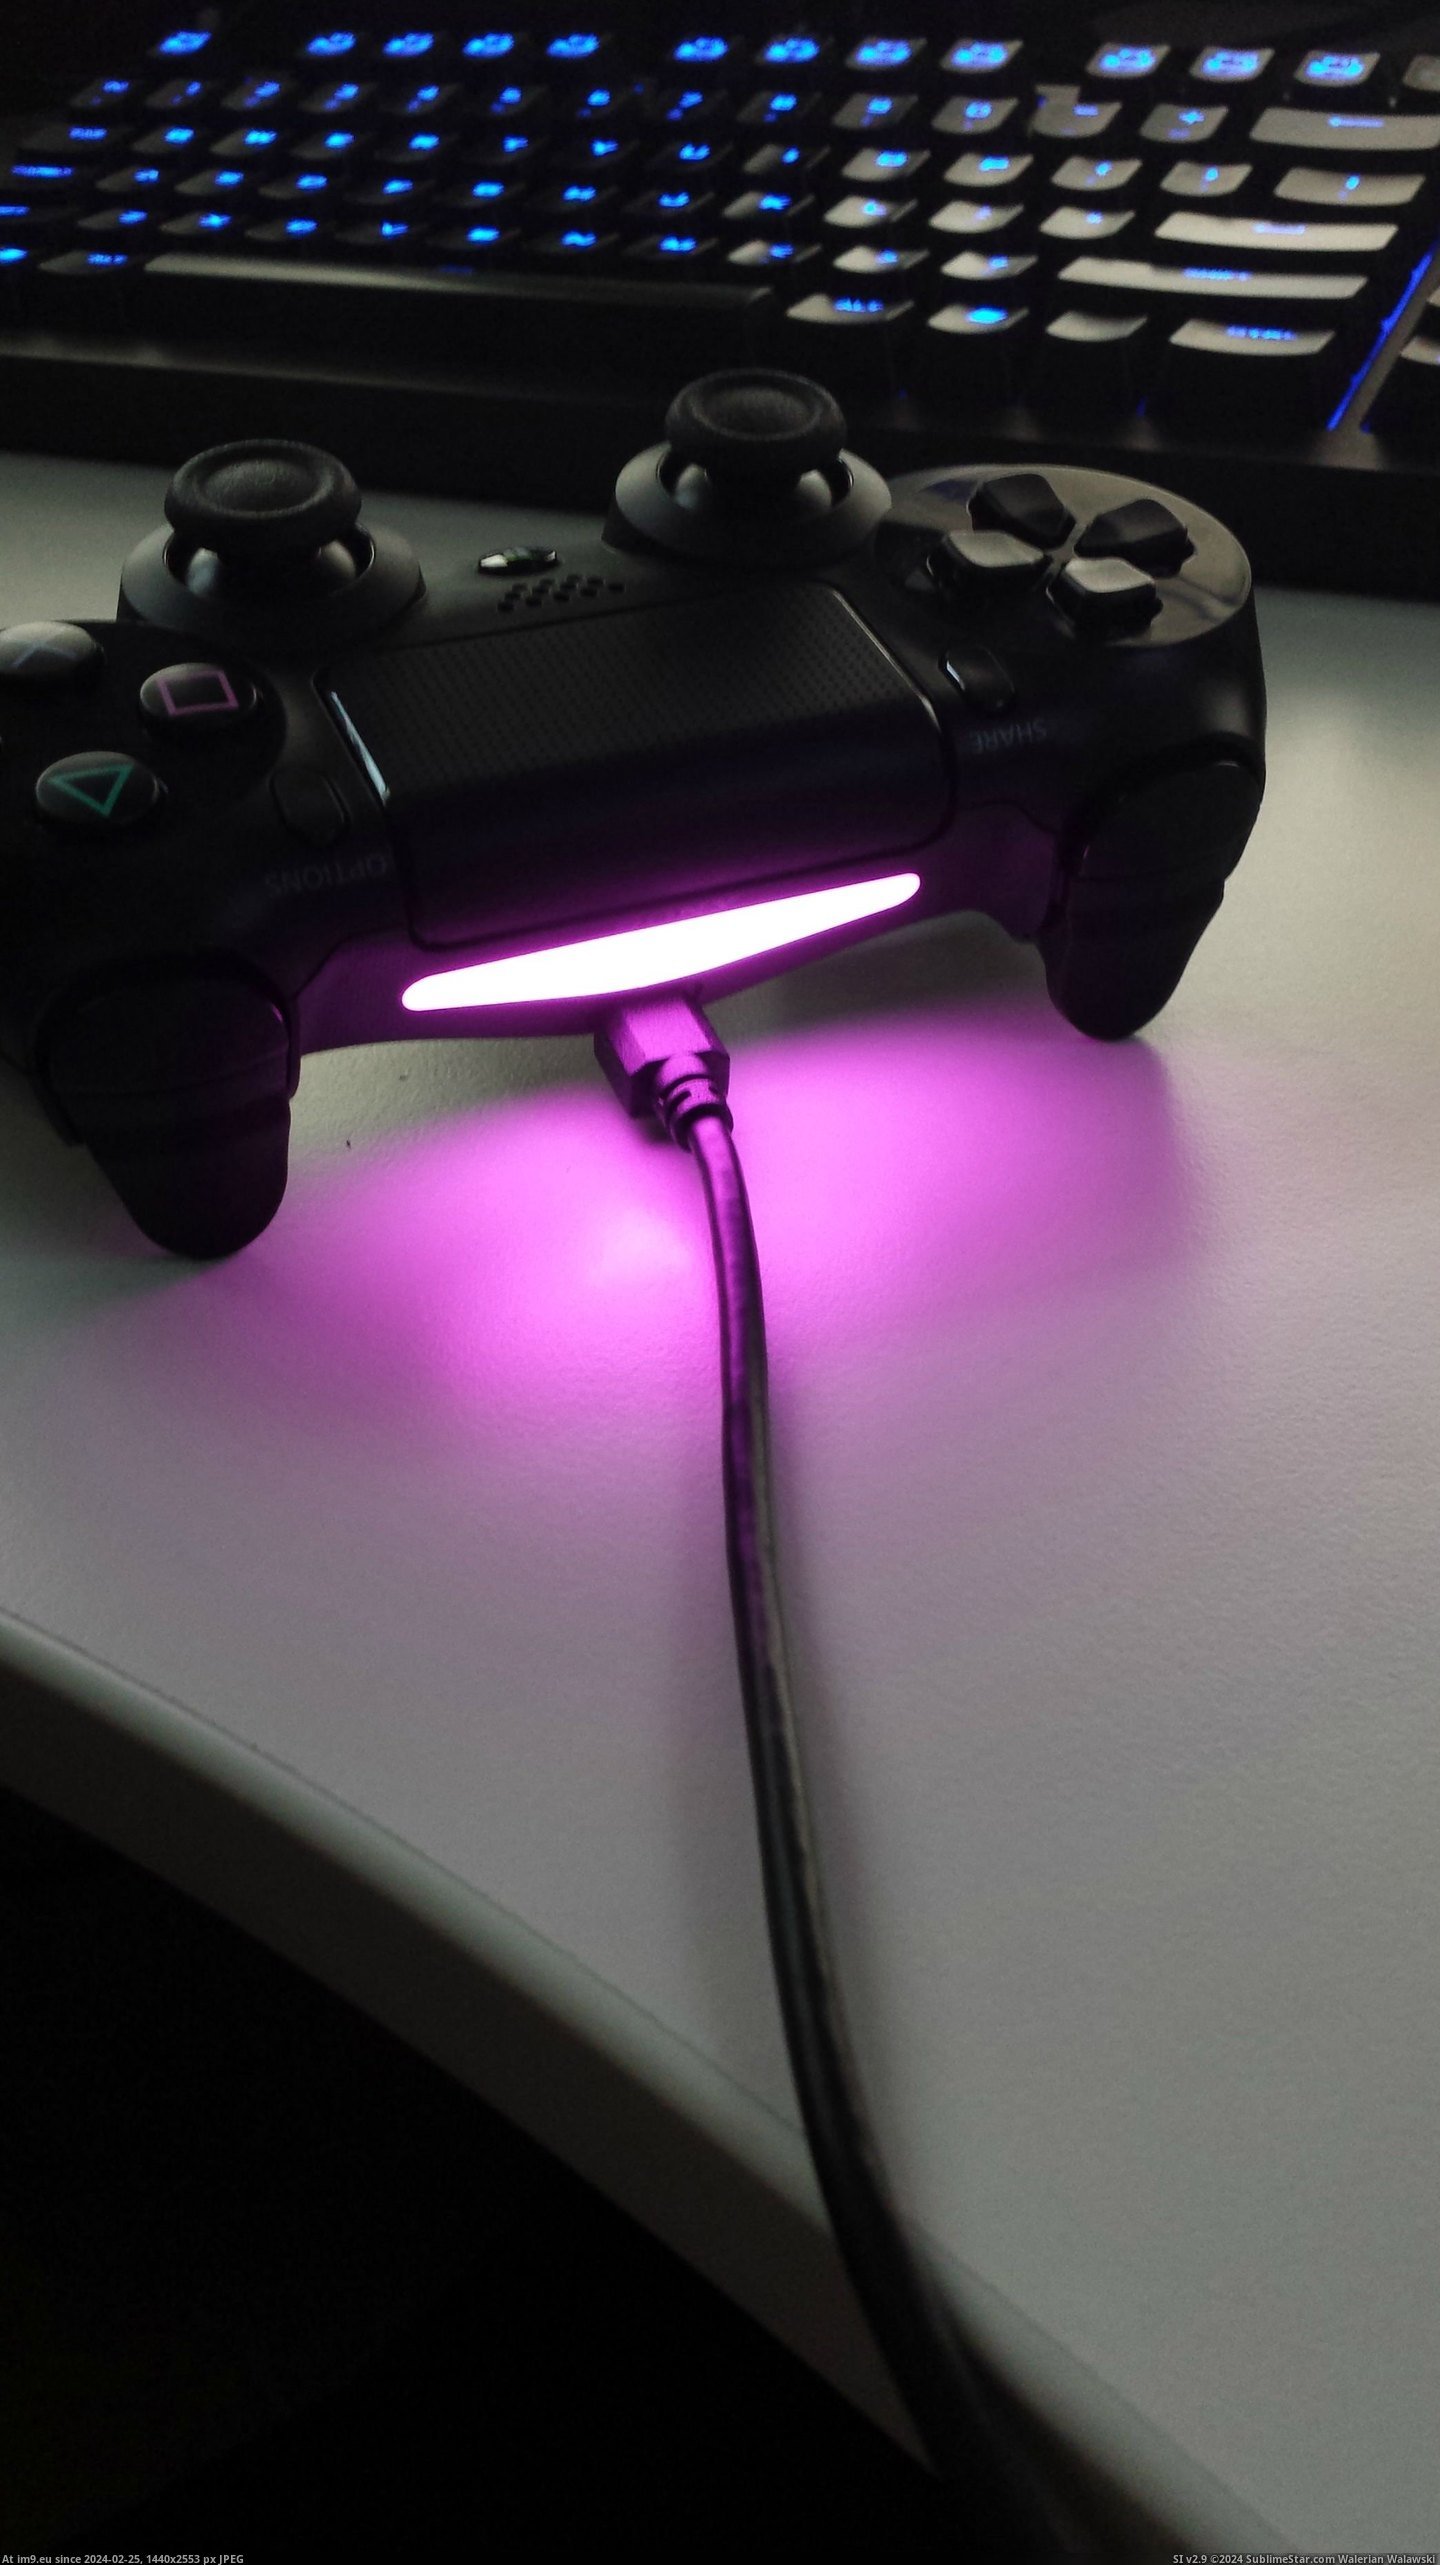 #Gaming #Change #Ps4 #Lightbar #Color #Controller [Gaming] If you use the PS4 controller on the PC, you can change the color of the lightbar. 1 Pic. (Bild von album My r/GAMING favs))